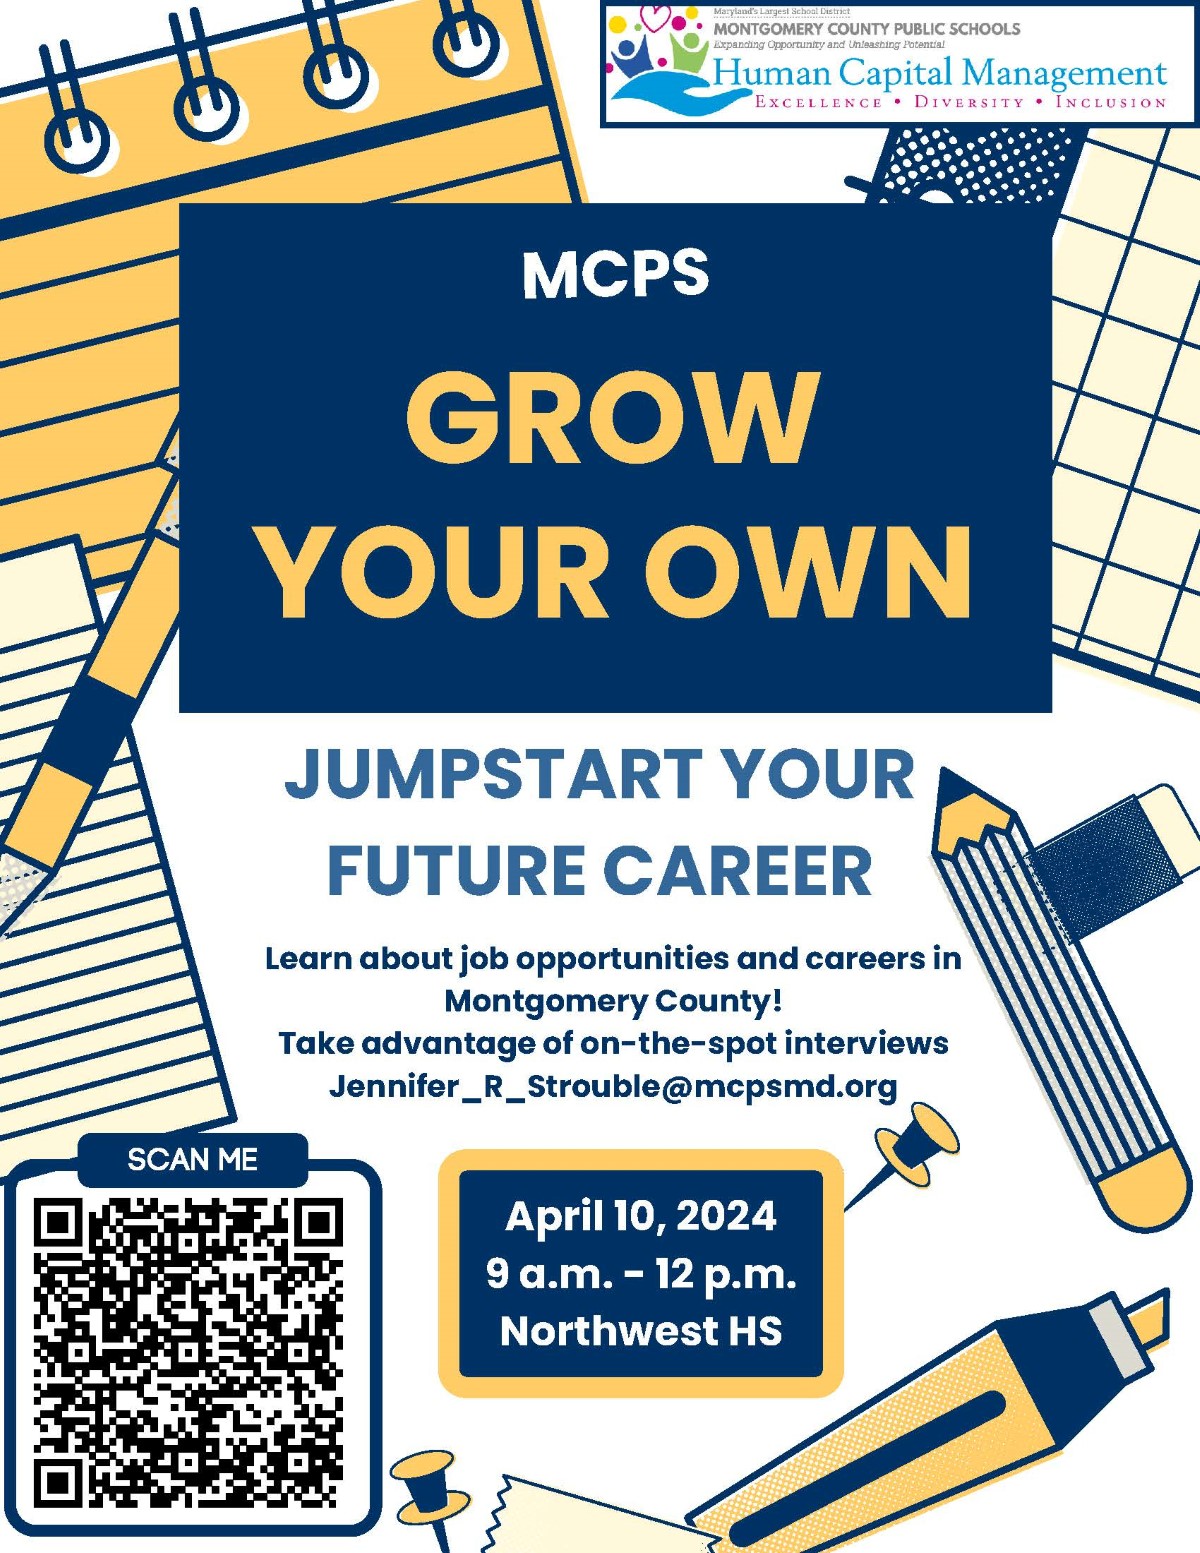 MCPS GYO Out of school Time Job Fair Flyer 041024 (2).jpg